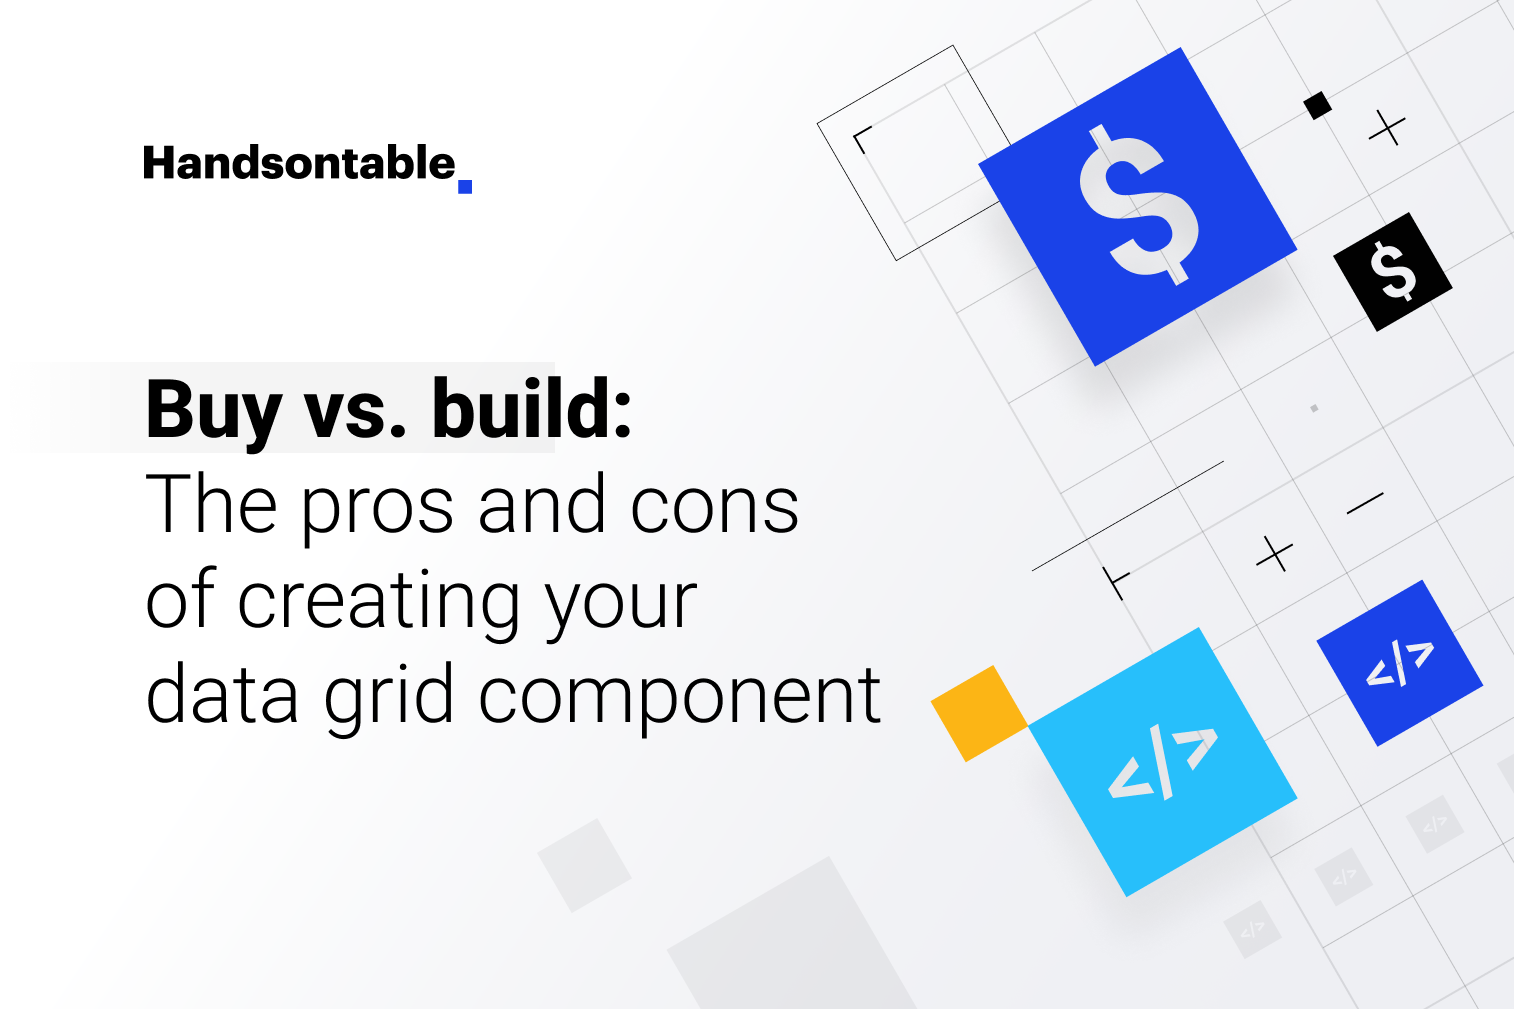 Buy vs. build: The pros and cons of creating your data grid component